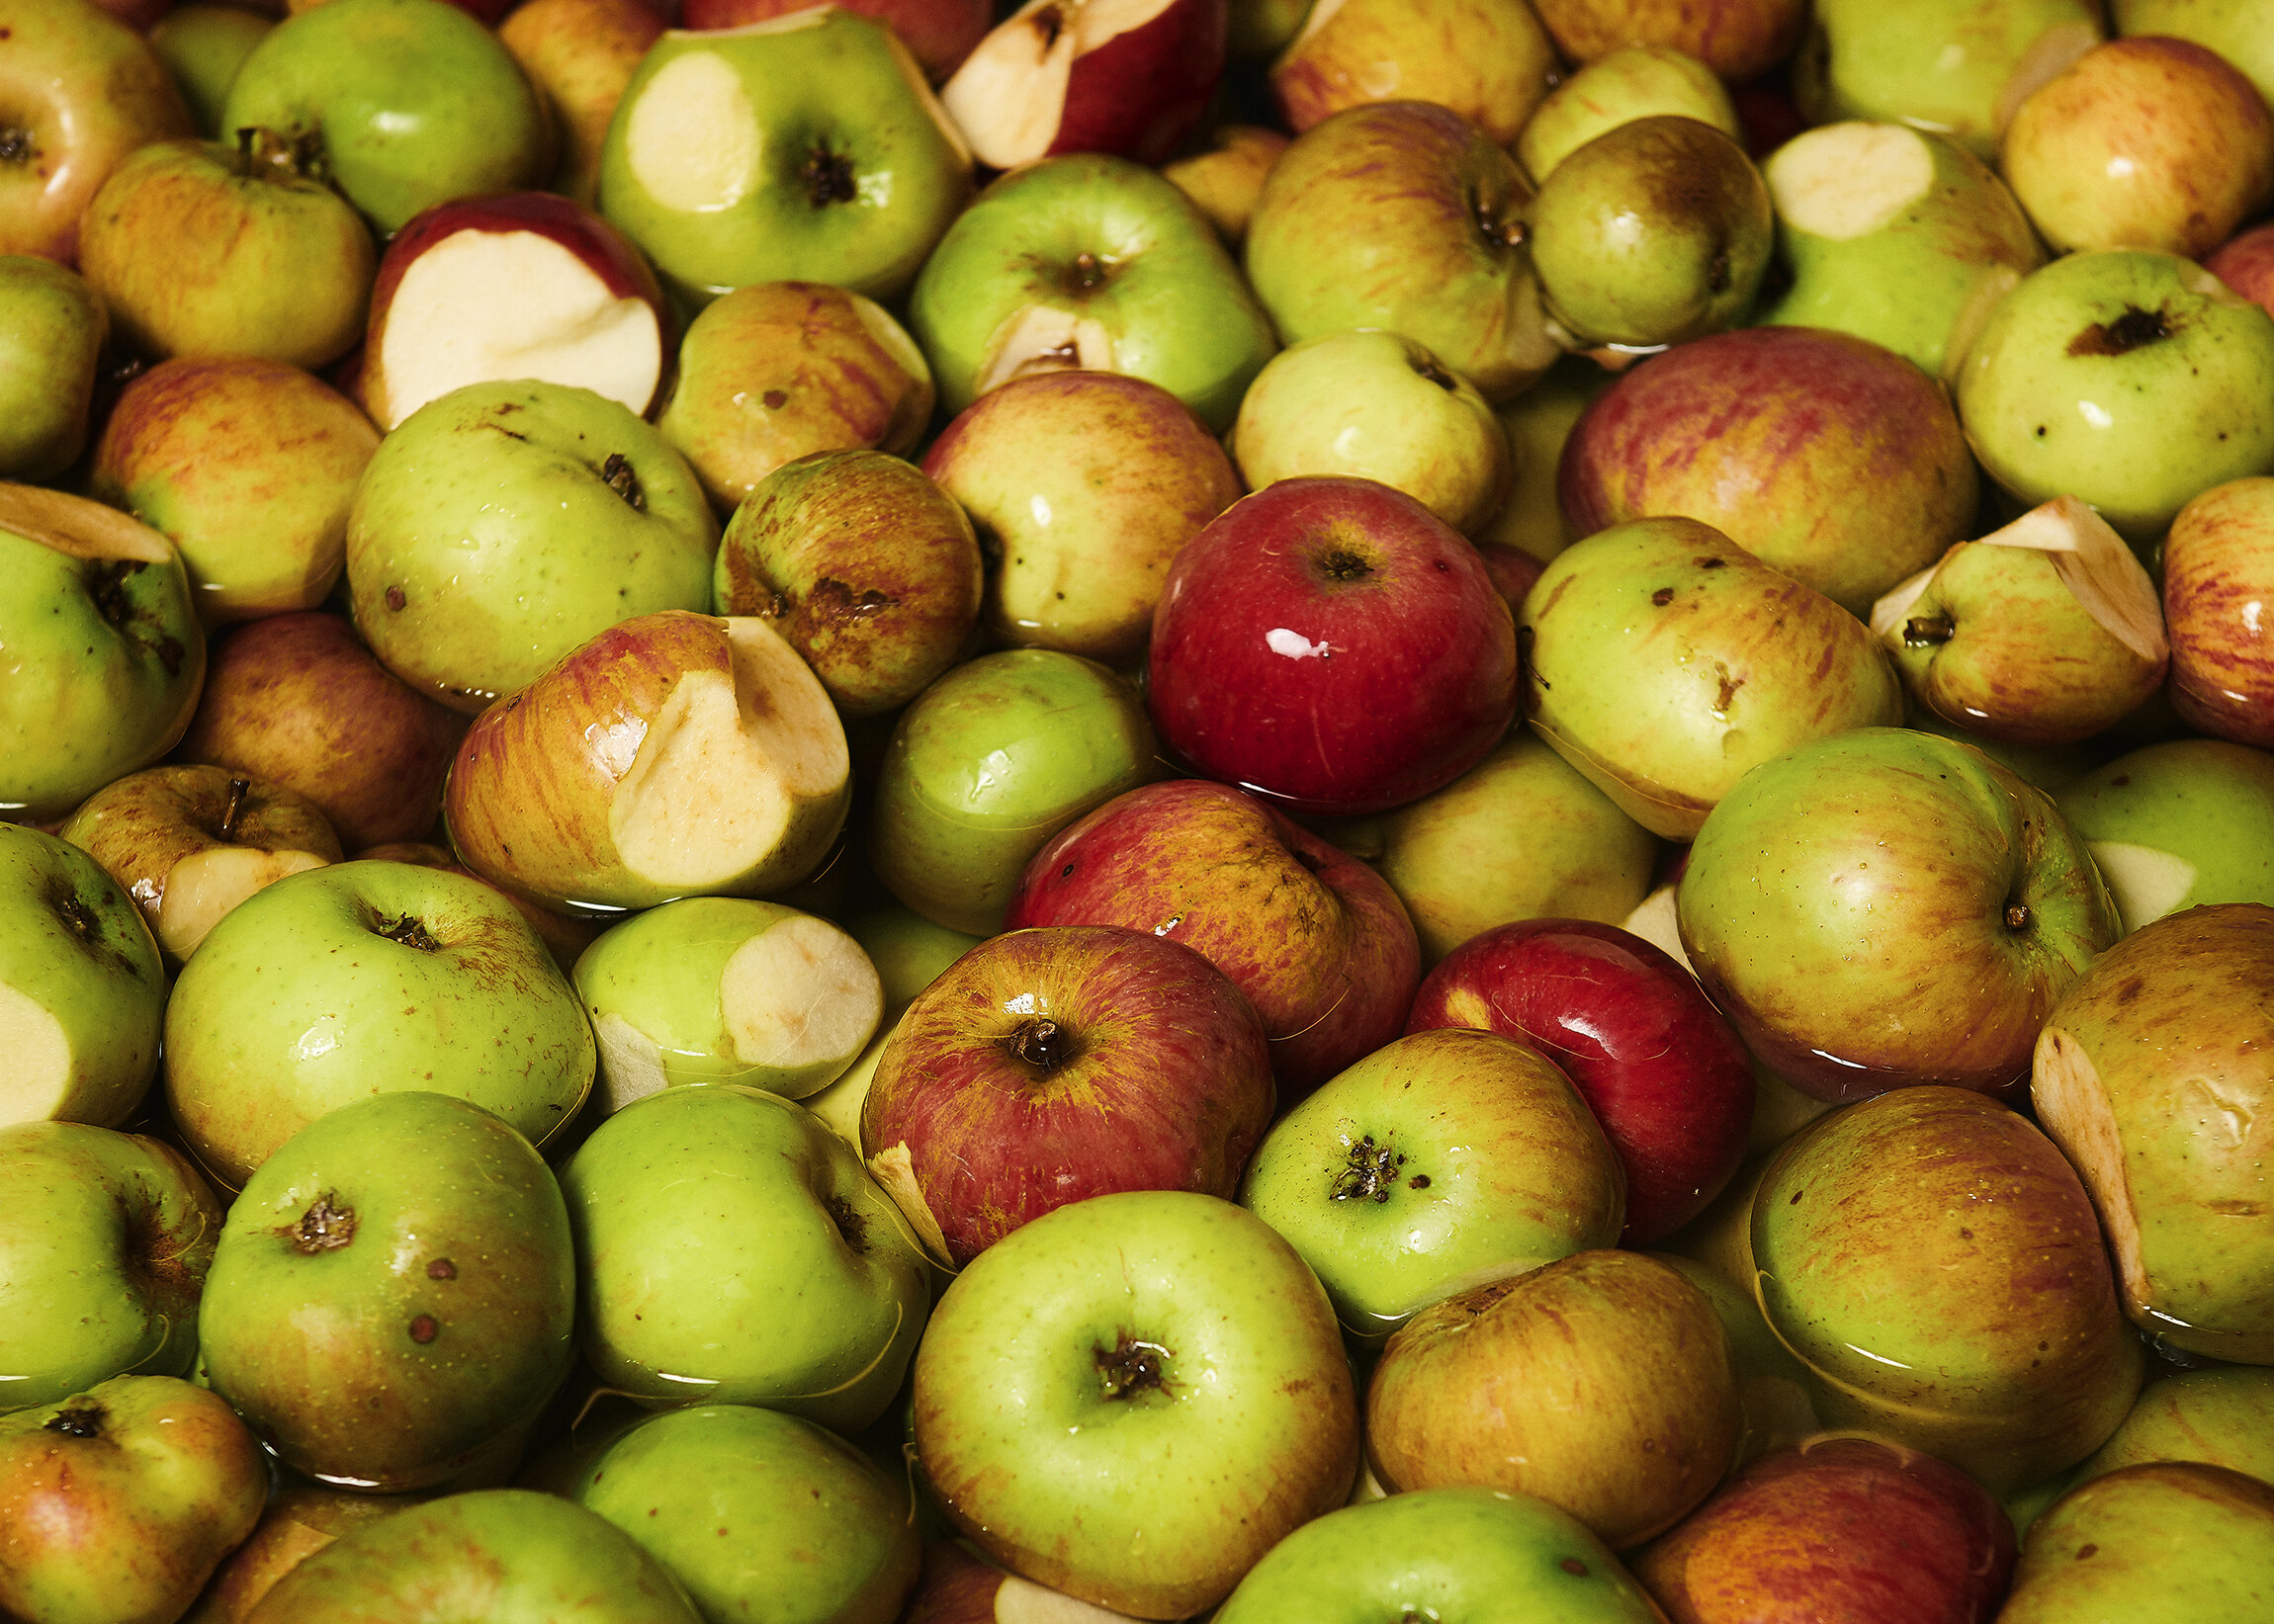 cider apples by London photographer Holly Pickering